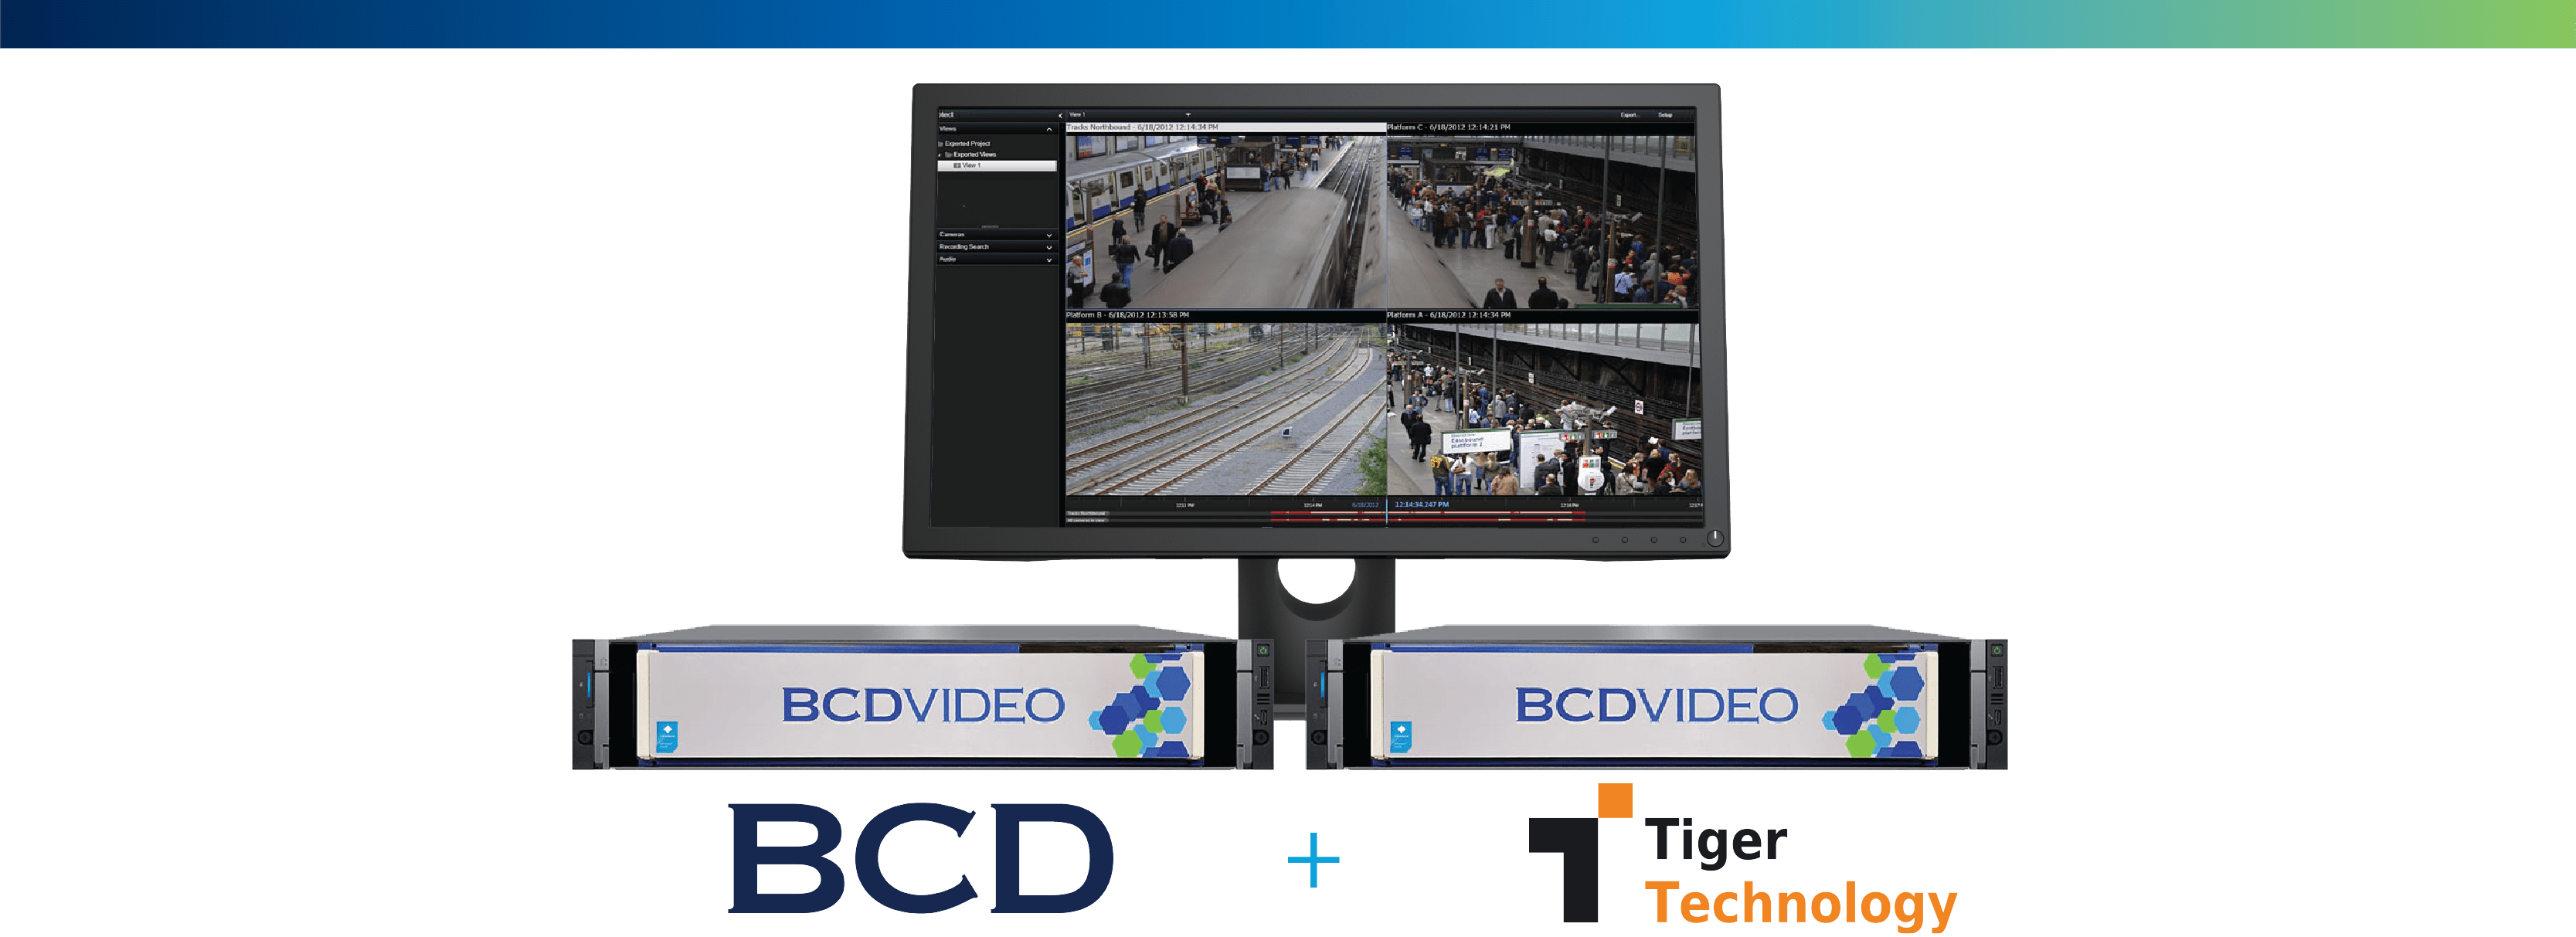 Partnership between BCD and Tiger Technology demonstration diagram with video monitor